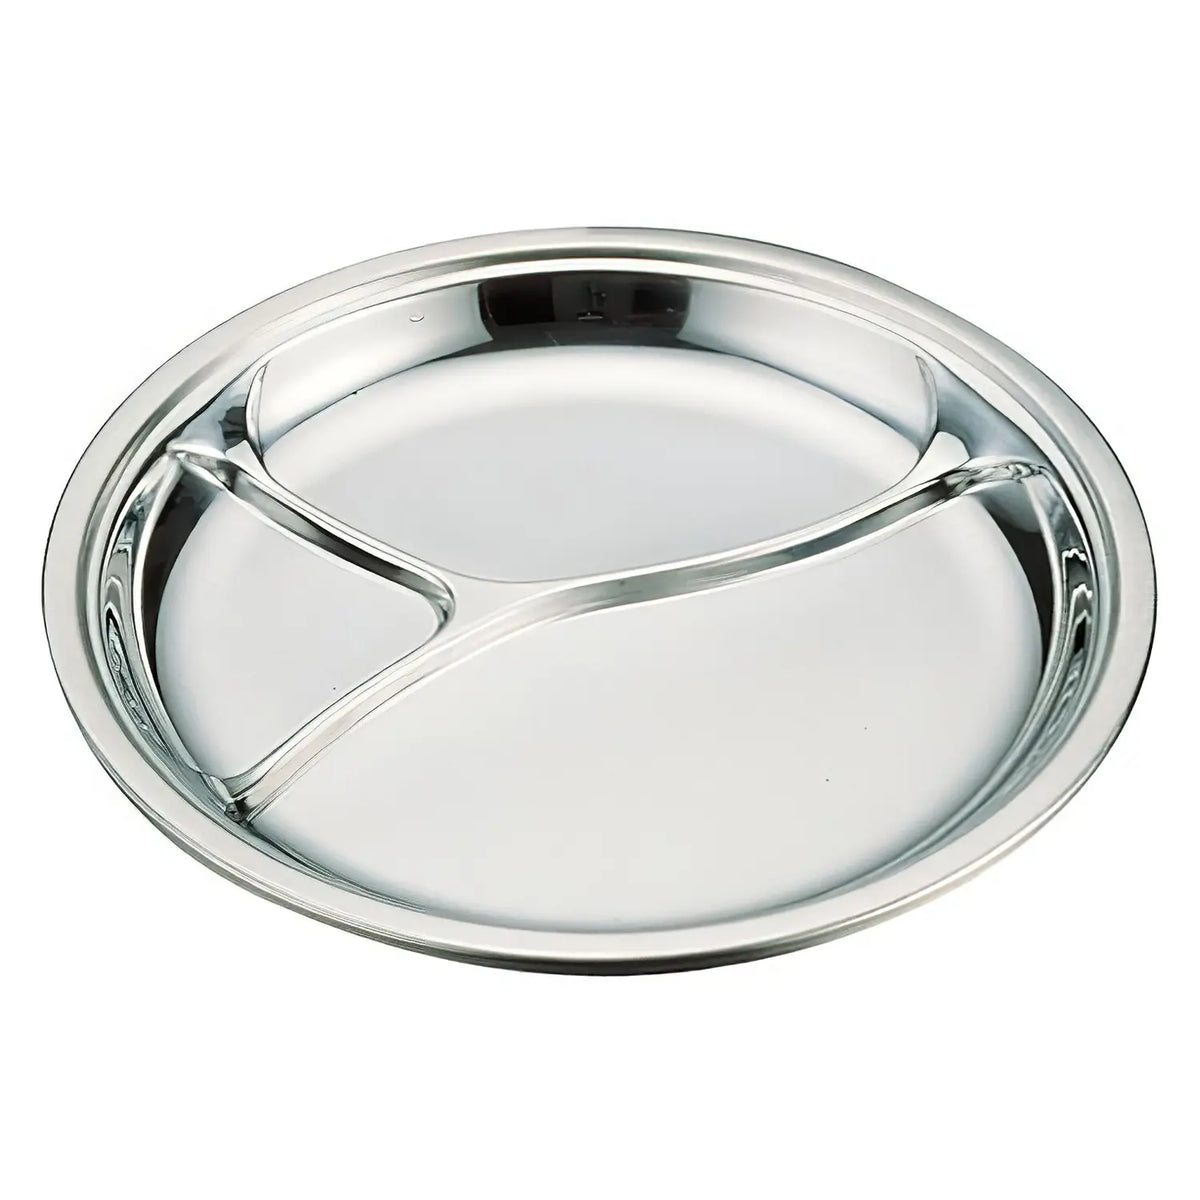 IKD Stainless Steel Antibacterial 3 Compartments Lunch Plate